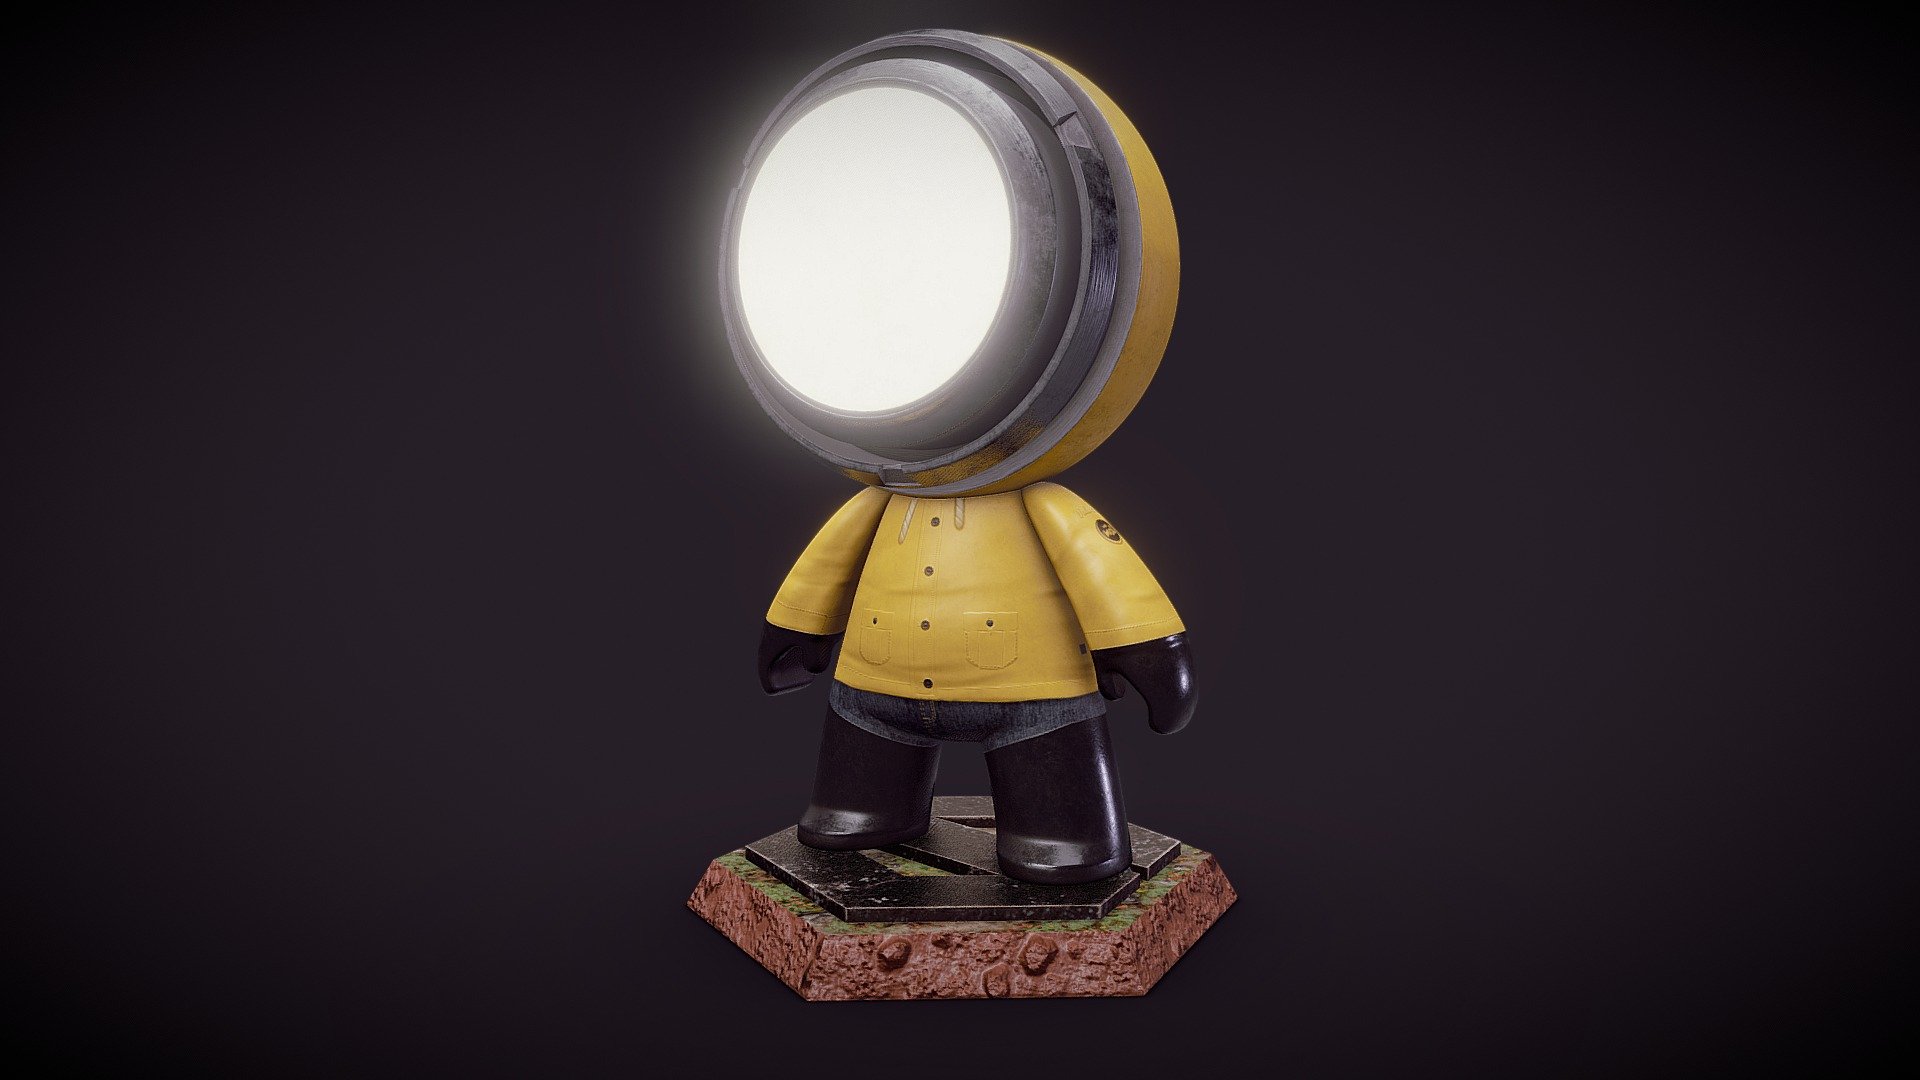 Painted this little guy  as my submission for the allegorithmic's &ldquo;MEET MAT: THE 2017 SUBSTANCE 3D PAINTING CONTEST